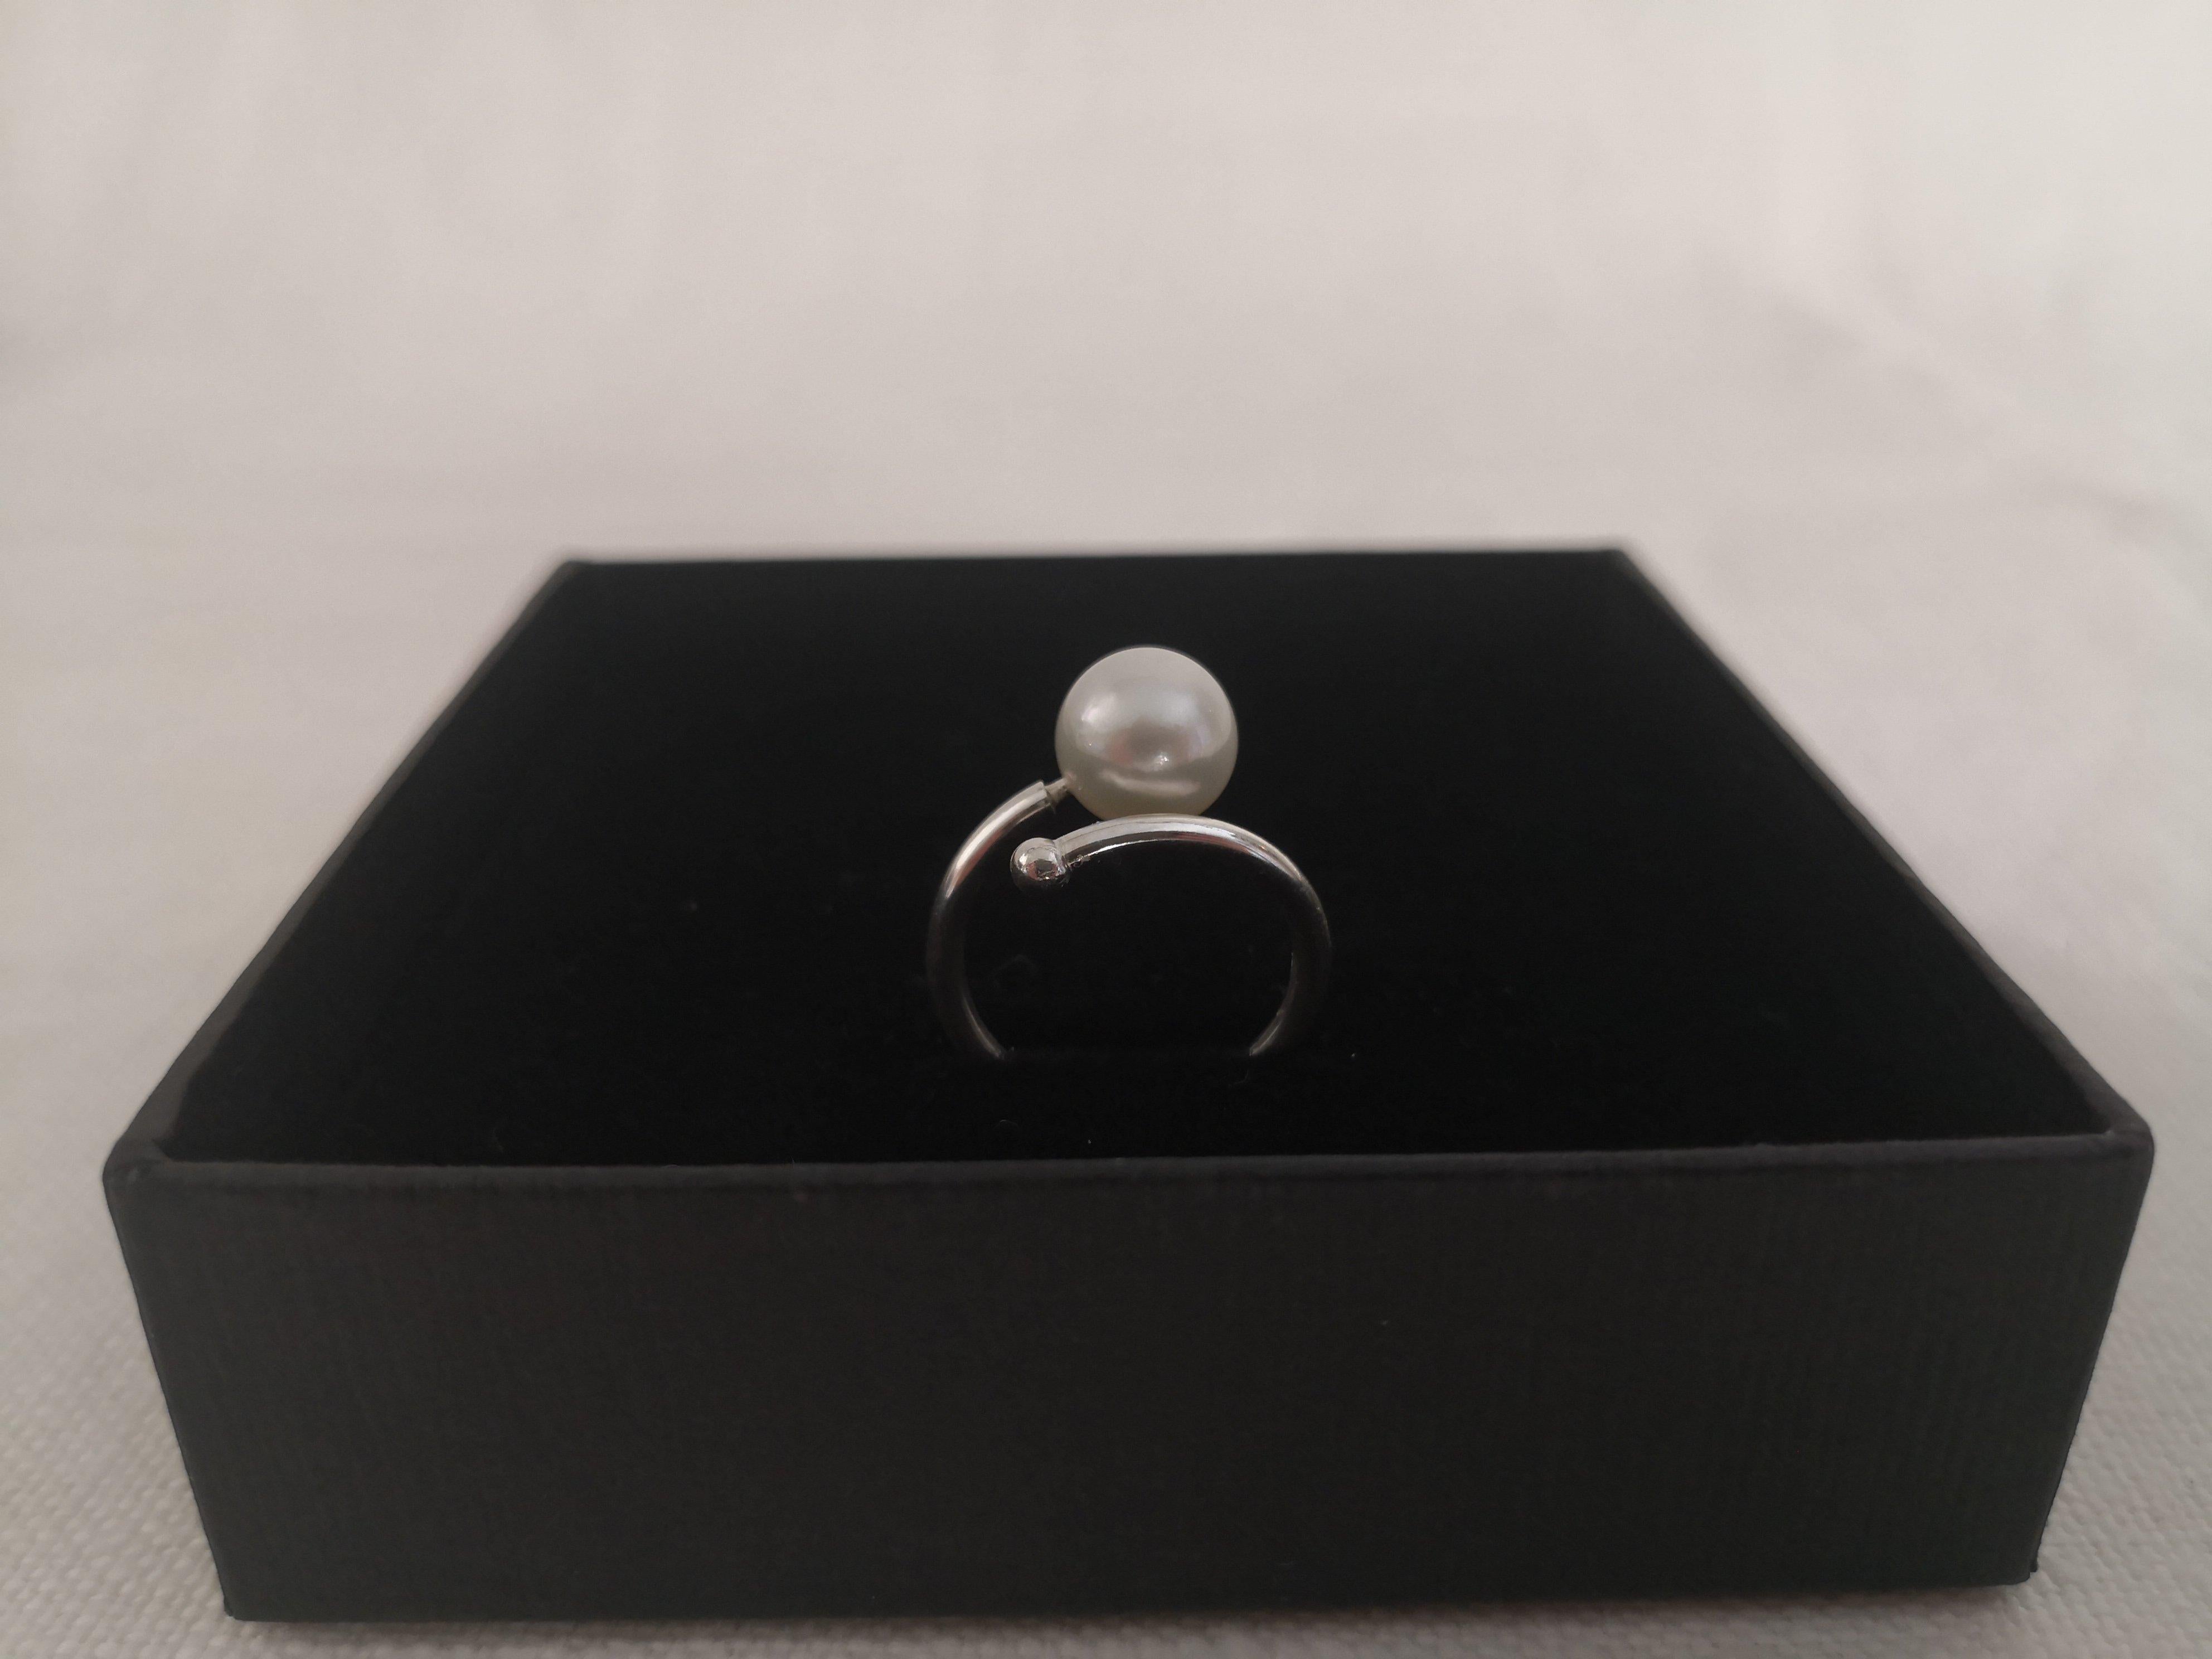 A Ring of a beautiful White Color South Sea Pearl 

- Size of Pearl 9 mm

- Shape: Round

- Origin of Pearl: Pinctada Maxima Oyster

- Area: Indonesia Ocean Waters

- Color: Pearl of White Natural Color

- Luster: High Natural Luster and Orient

-